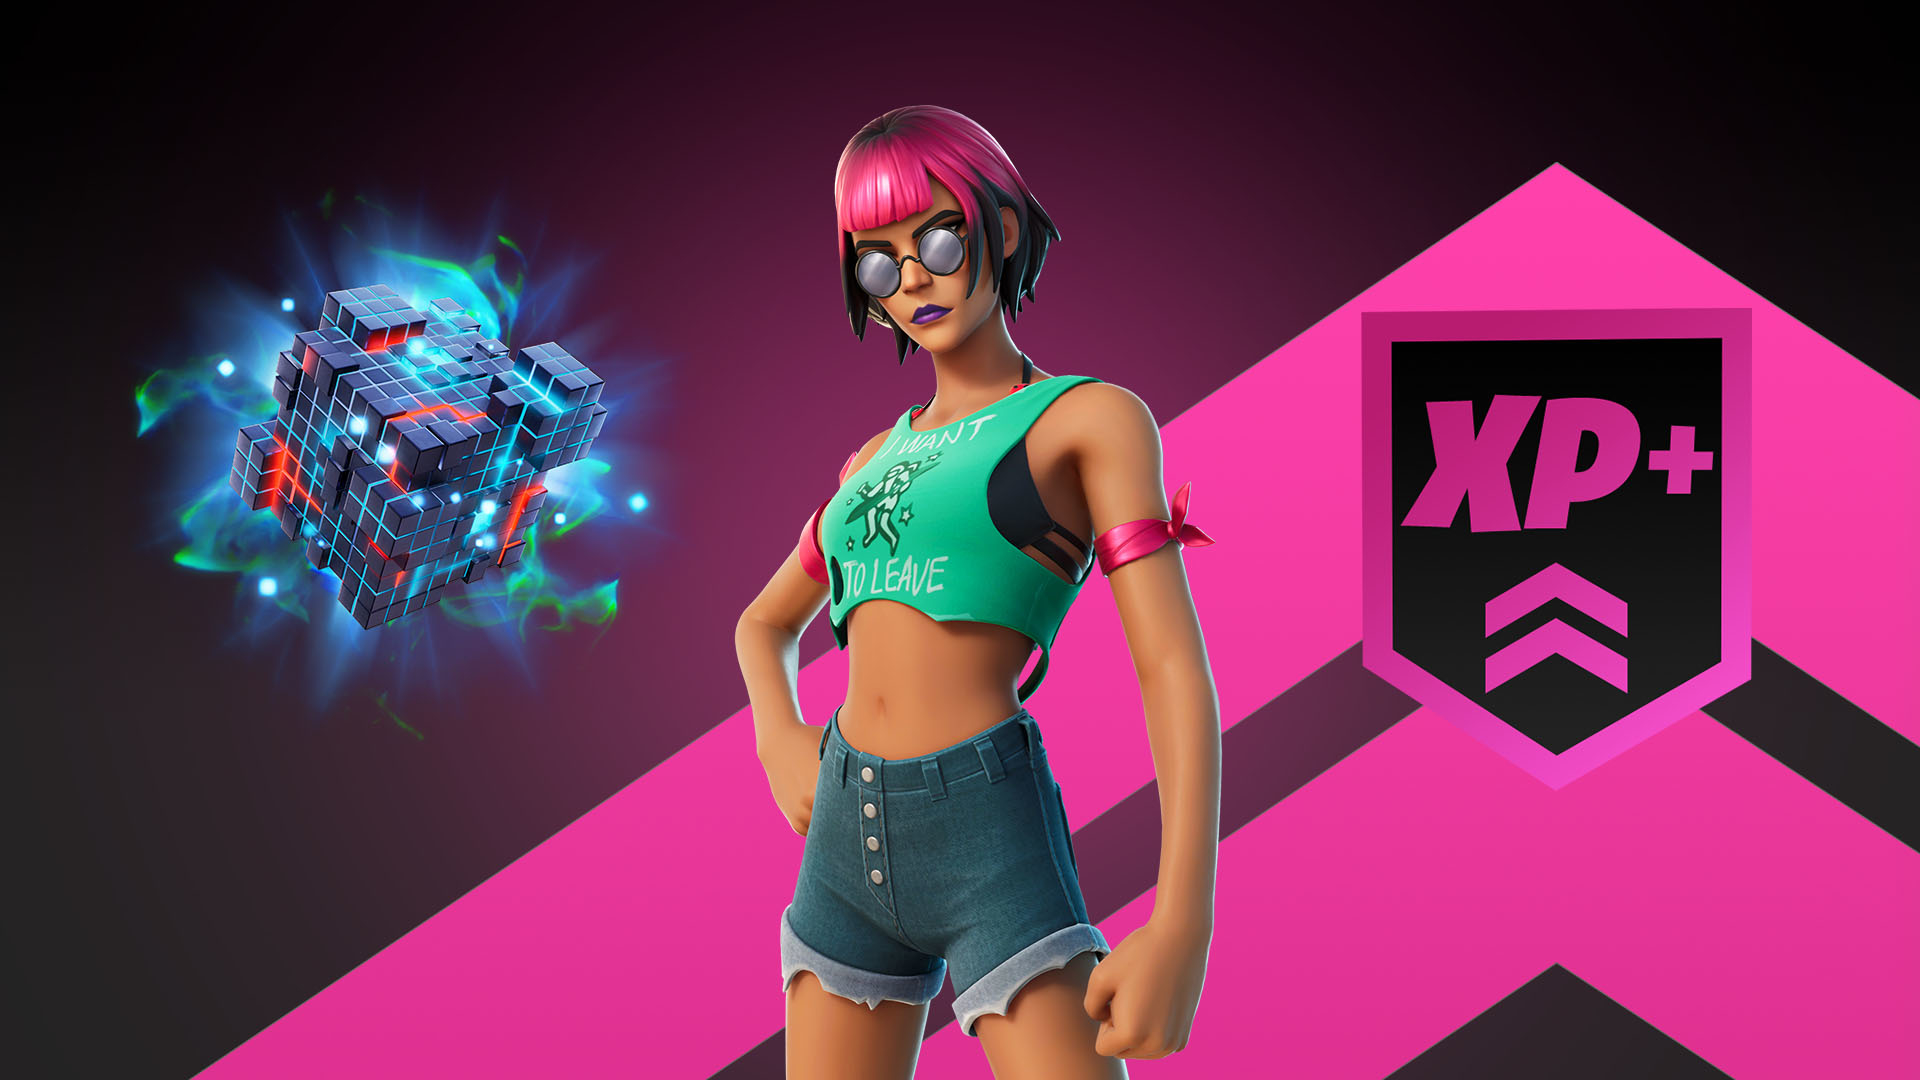 Fortnite All Chapter Battle Pass Skins Wallpapers - For Smart Phone Home &  Lock Screen | Gaming wallpapers, Fortnite, Game wallpaper iphone